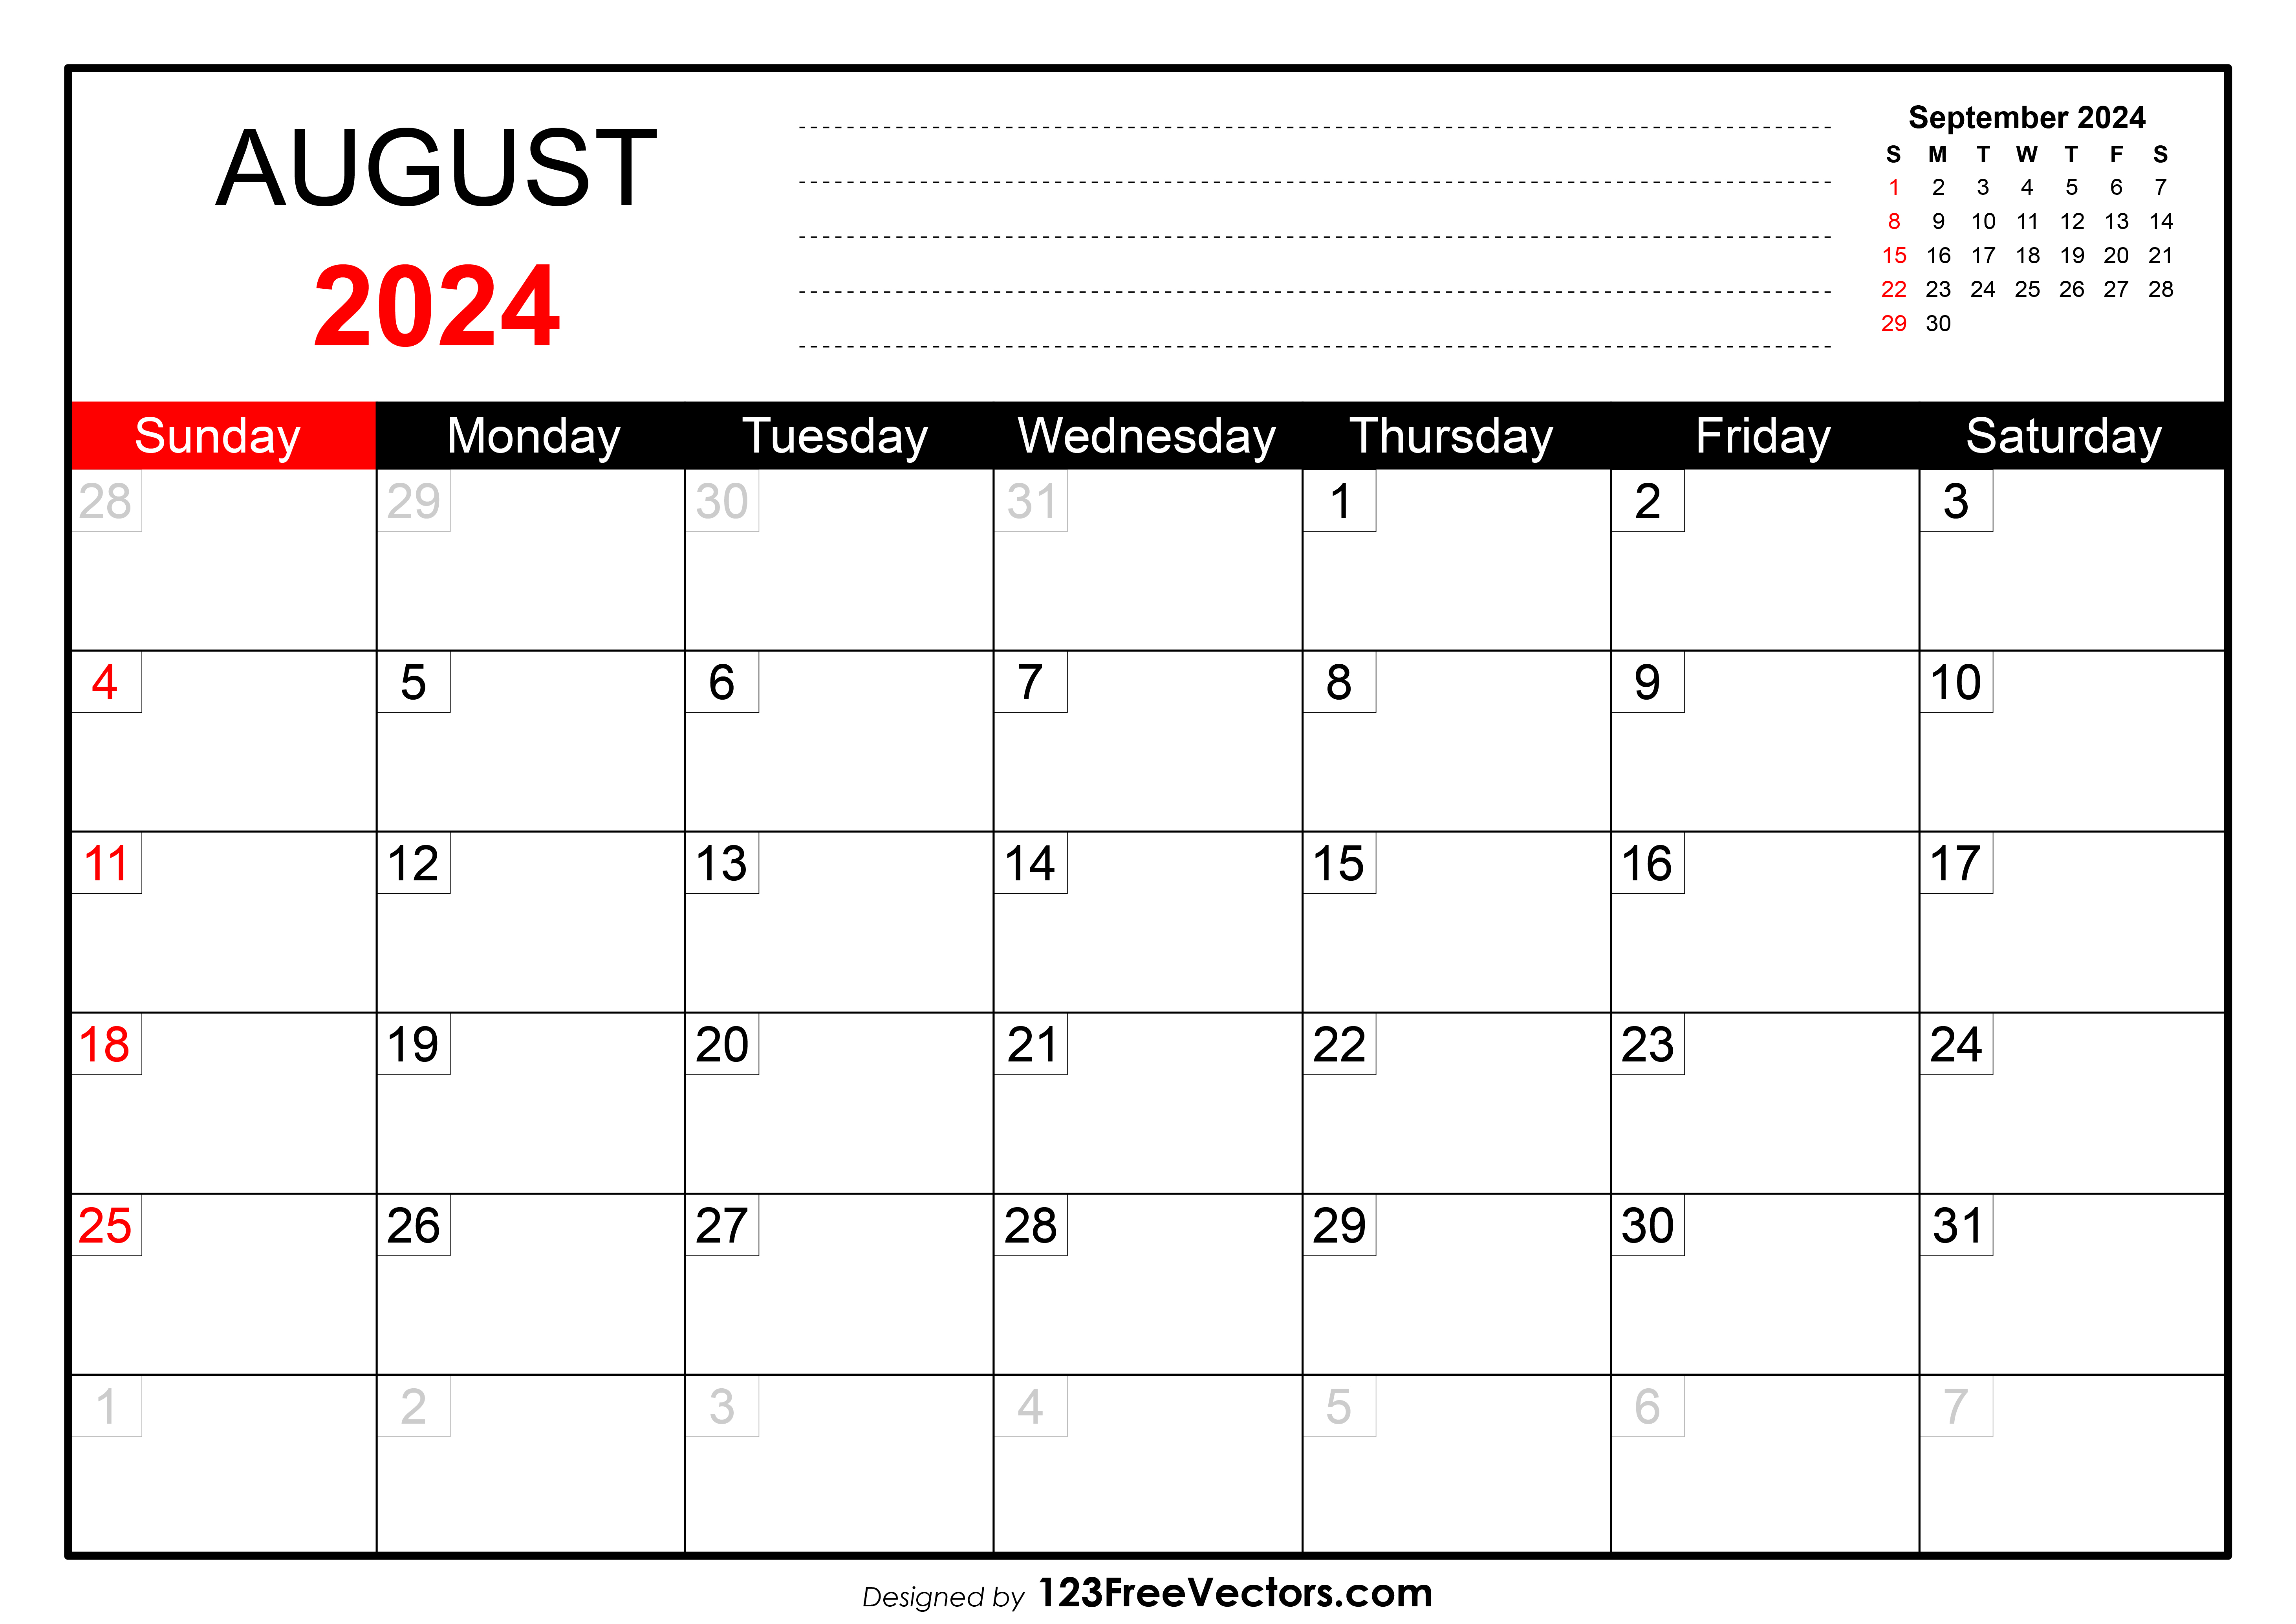 august-2024-calendar-with-notes-wikidates